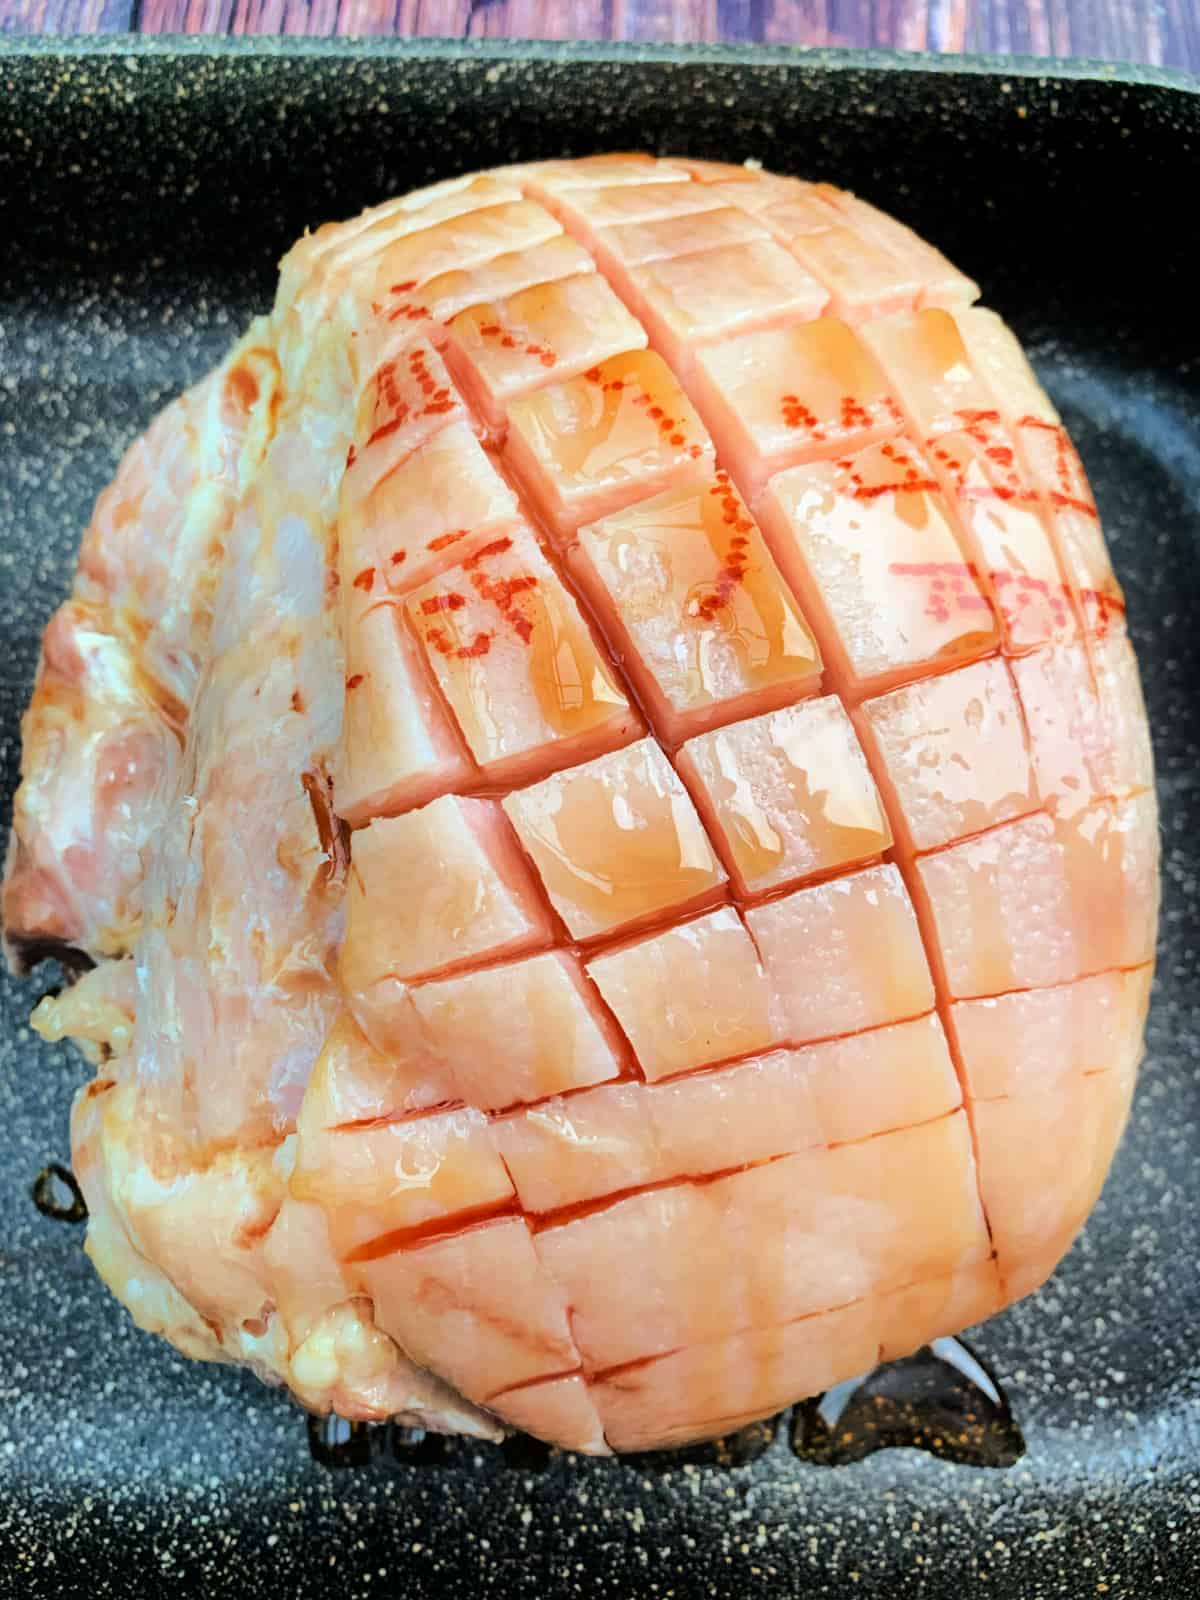 Gammon drizzled with maple syrup, before roasting.